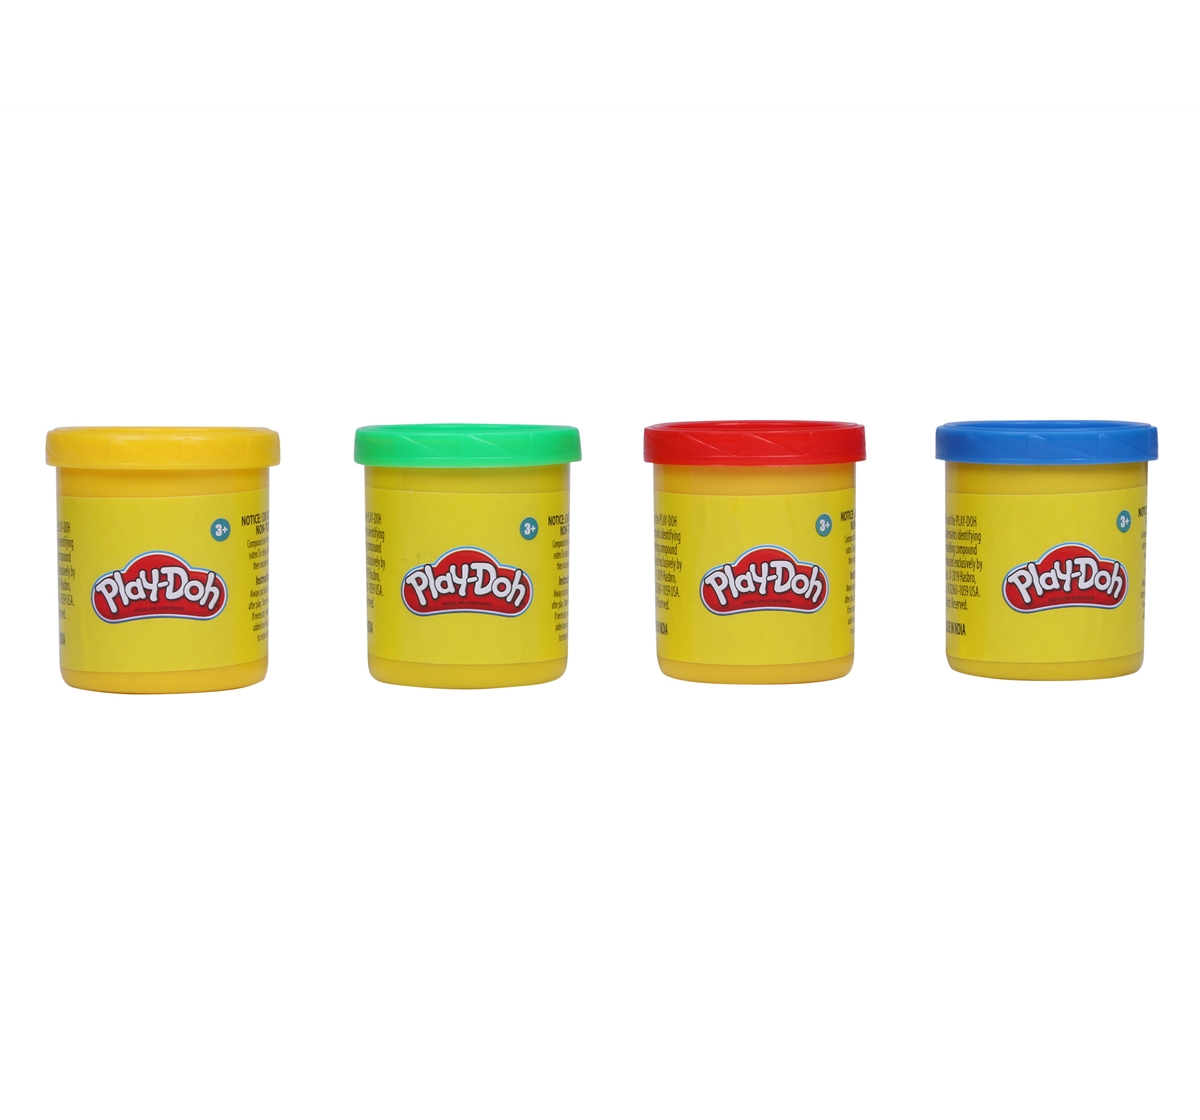 Play-Doh | Play Doh Value Pack of 4 with 2 Ounce Cans for kids 3Y+, Multicolour 1